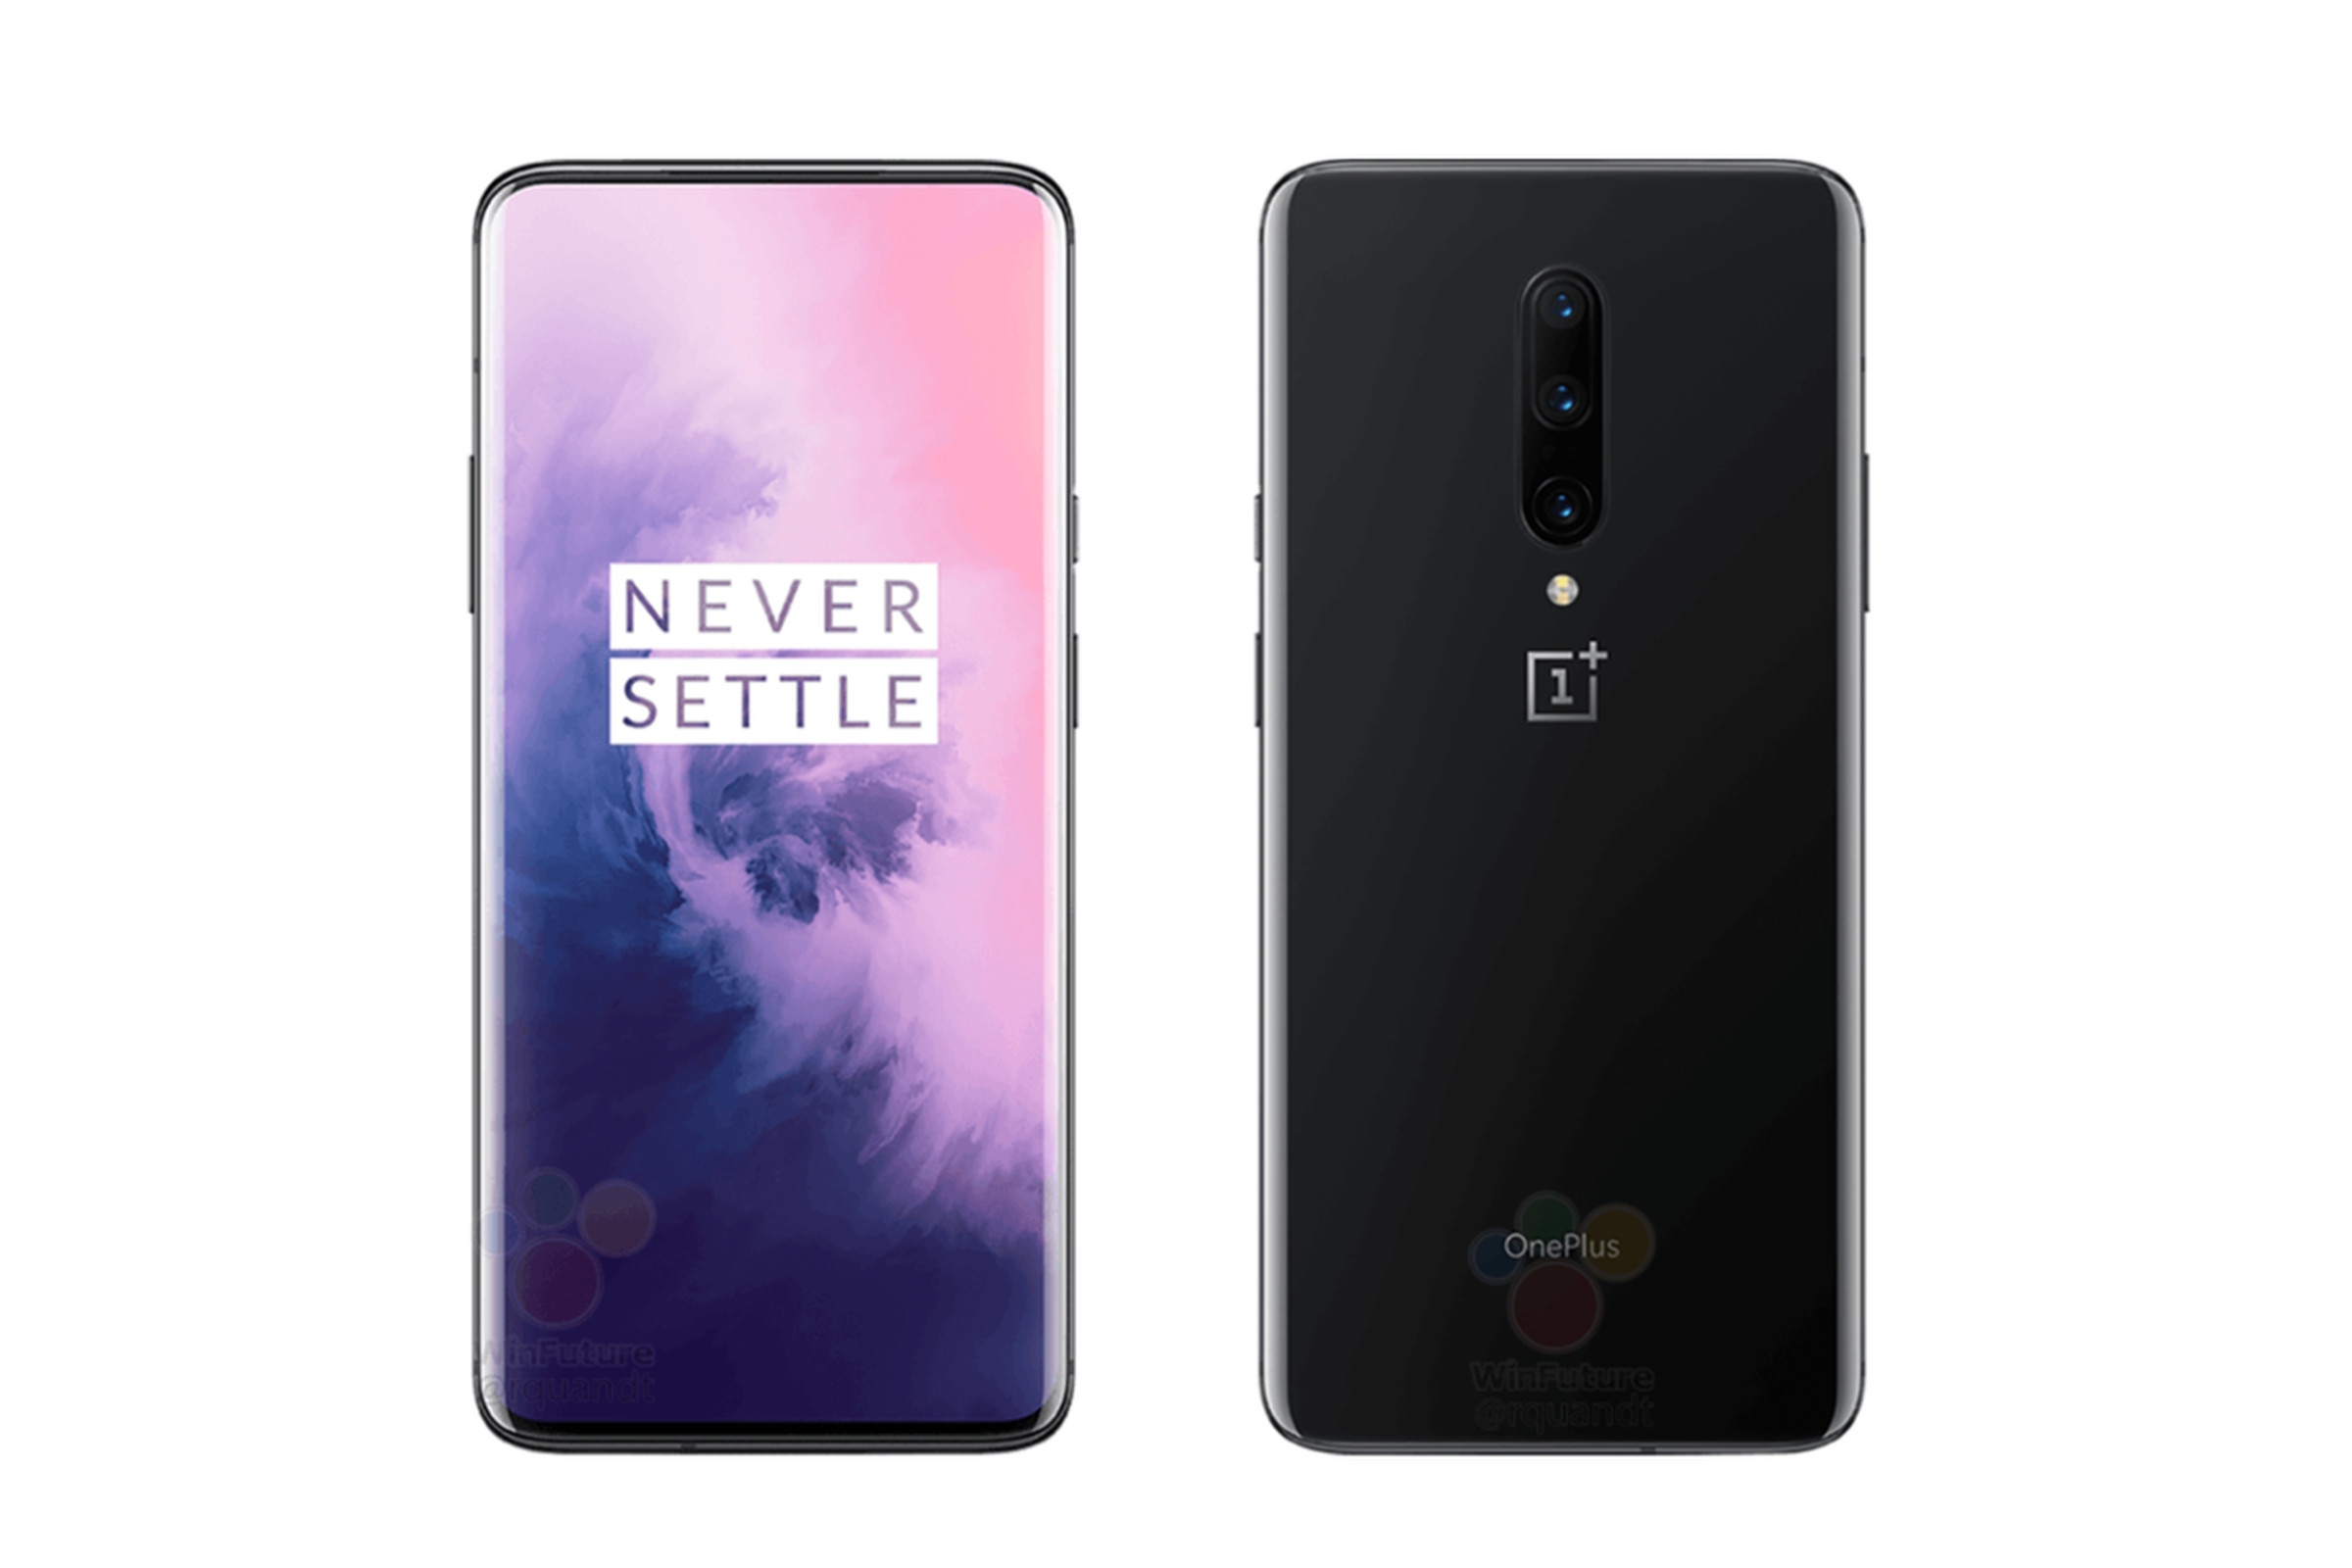 The upcoming OnePlus 7 Pro.